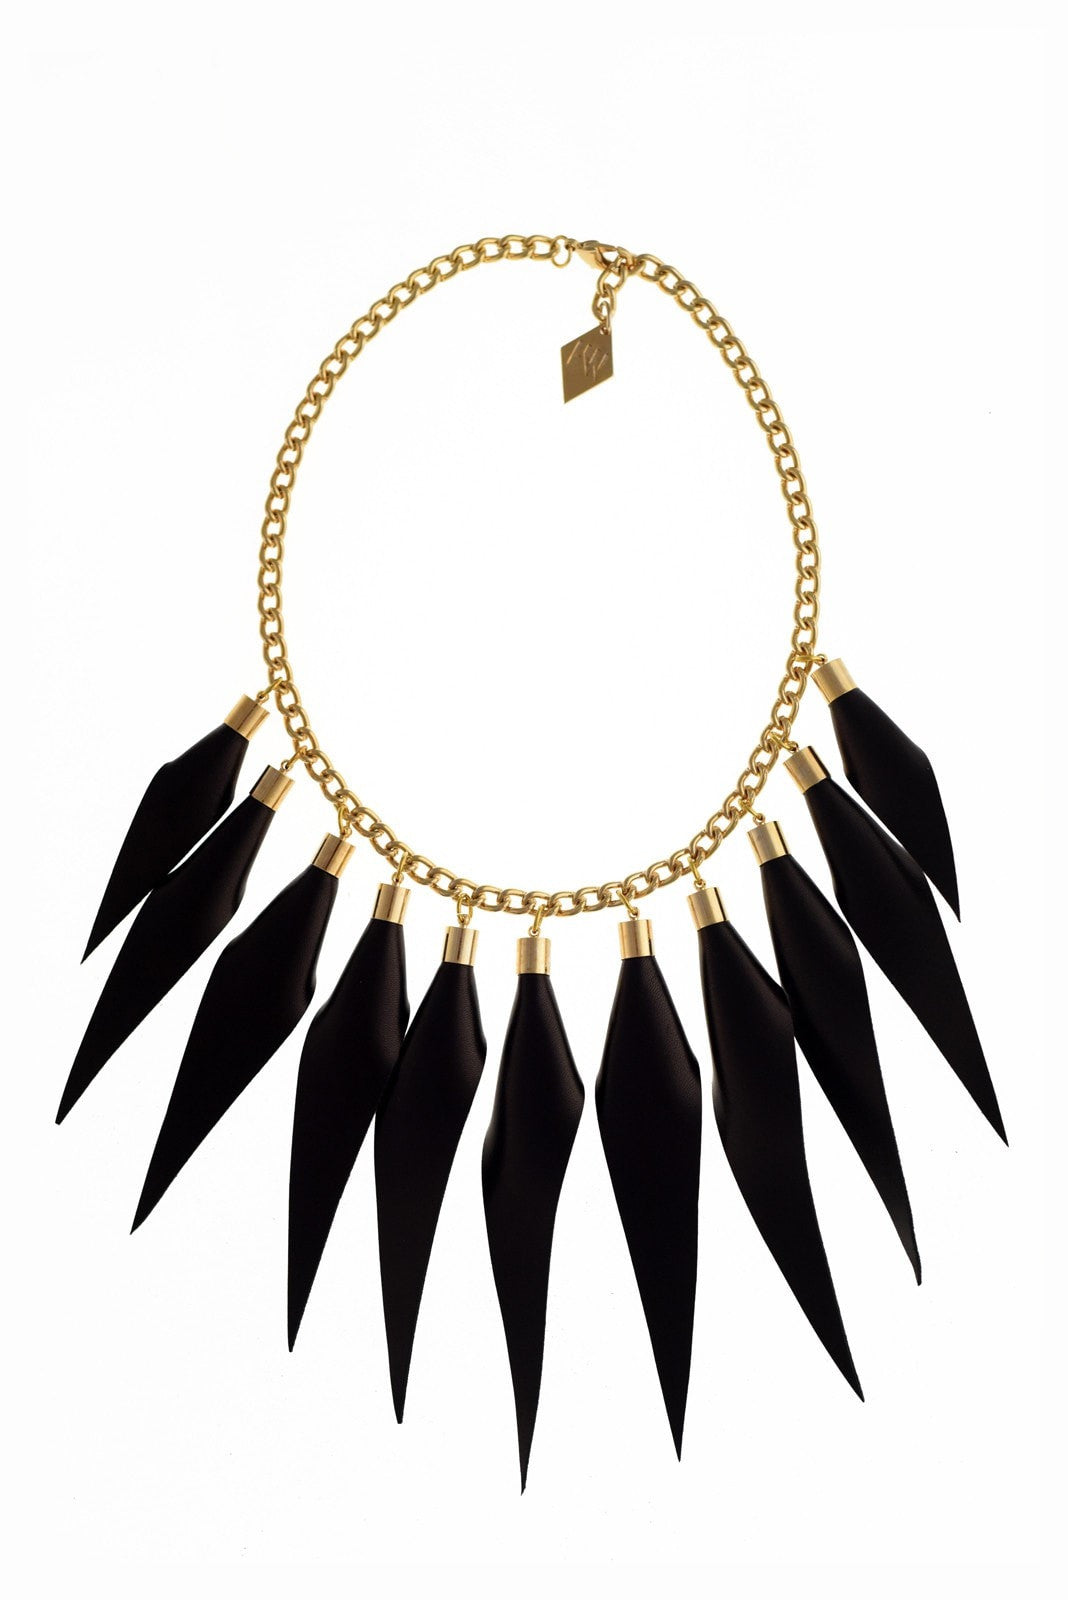 Black gold edition: made of leather spikes with galvanized brass and metal components.